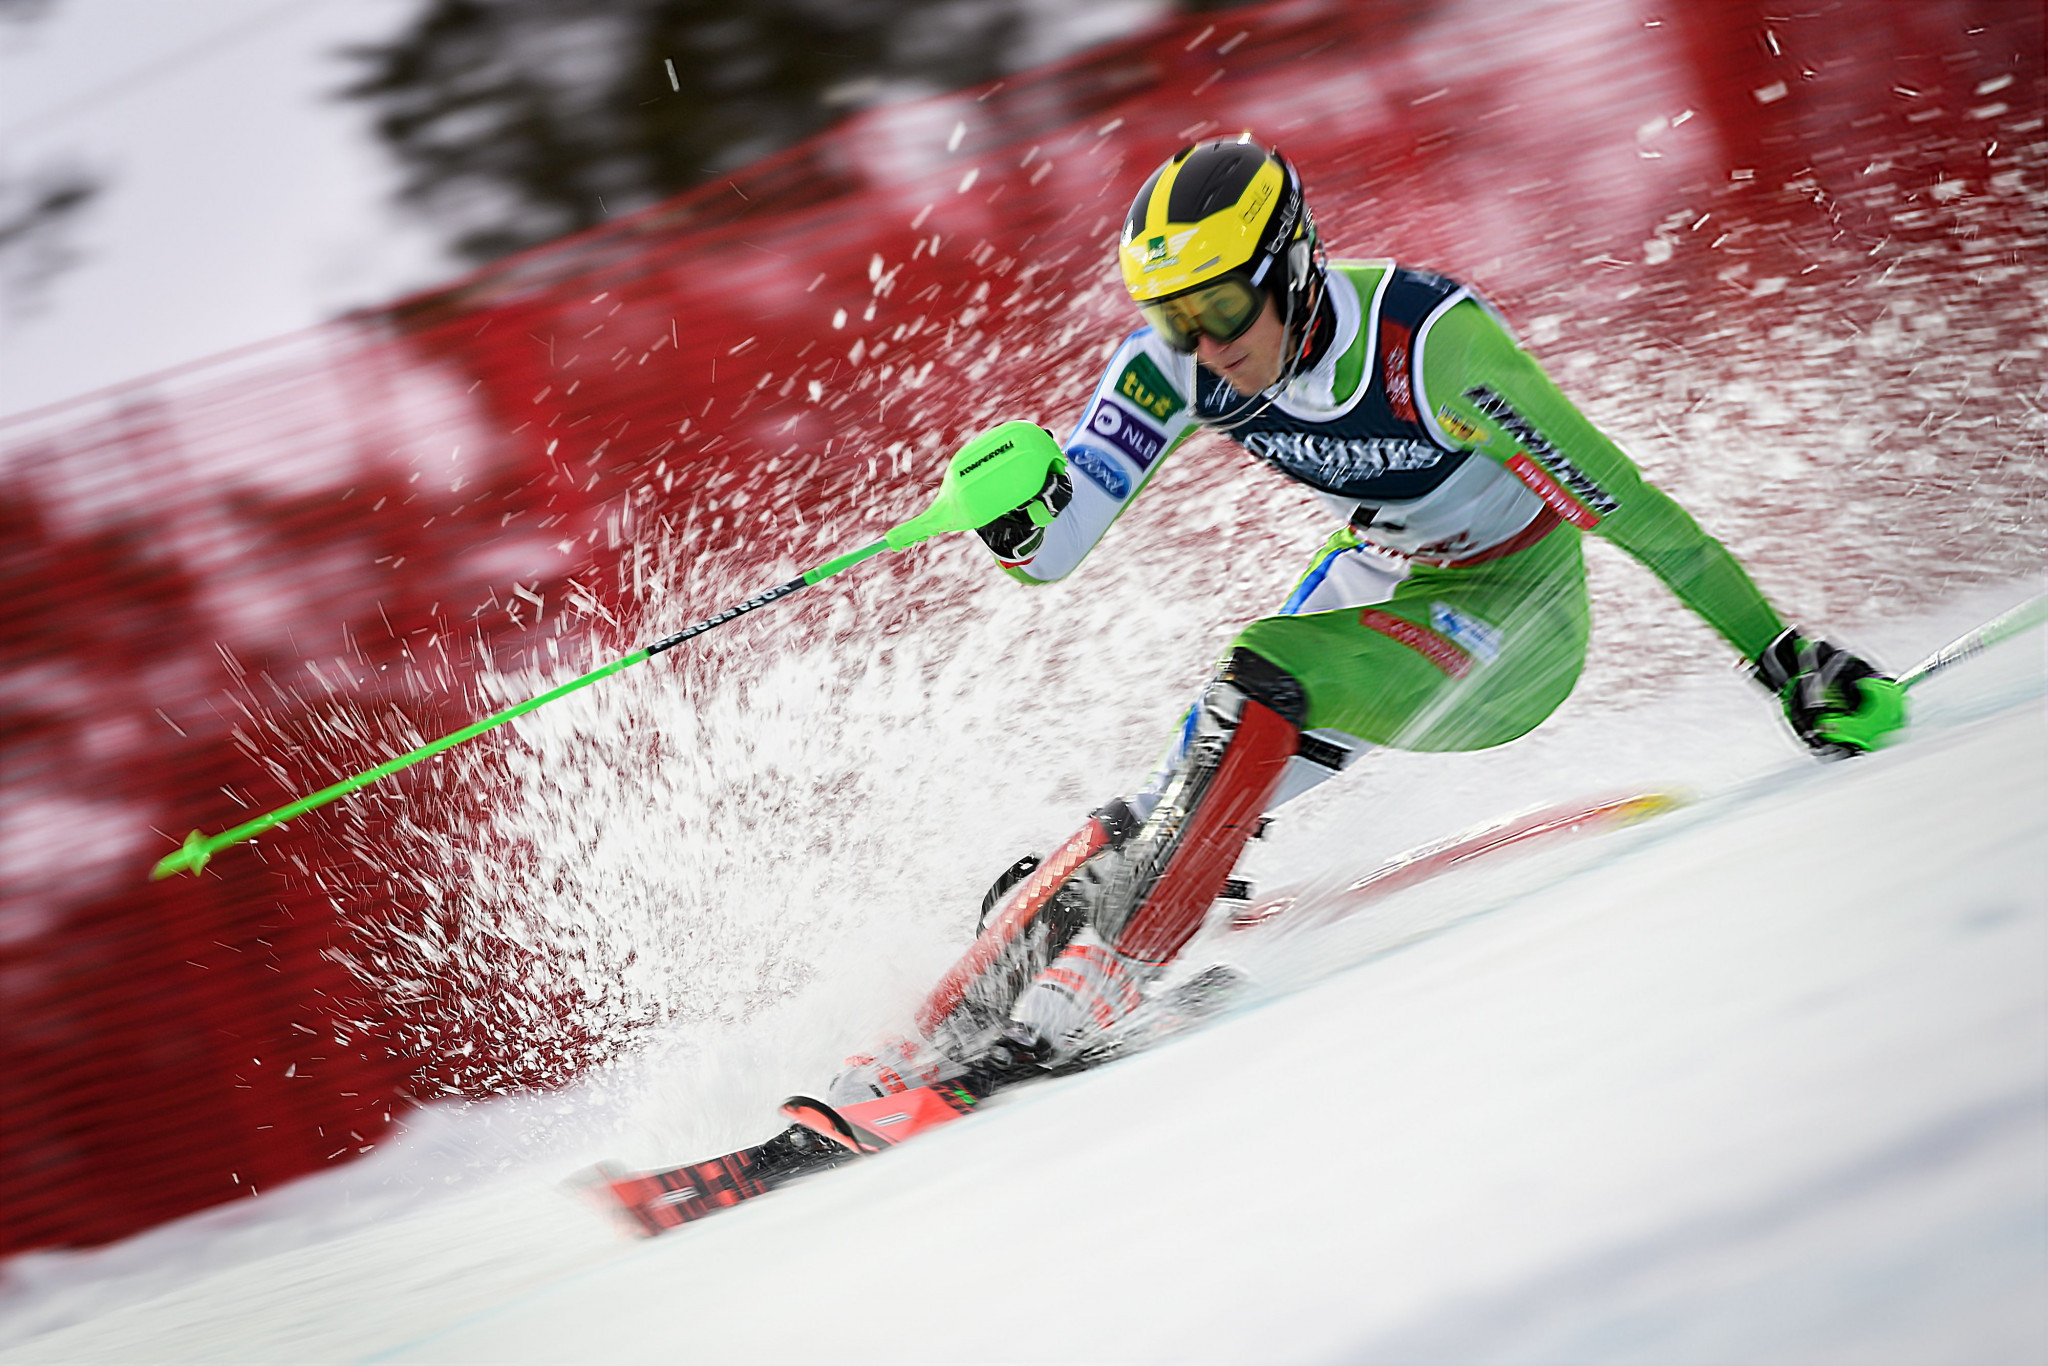 Slovenia's Stefan Hadalin ended as the silver medallist ©Getty Images